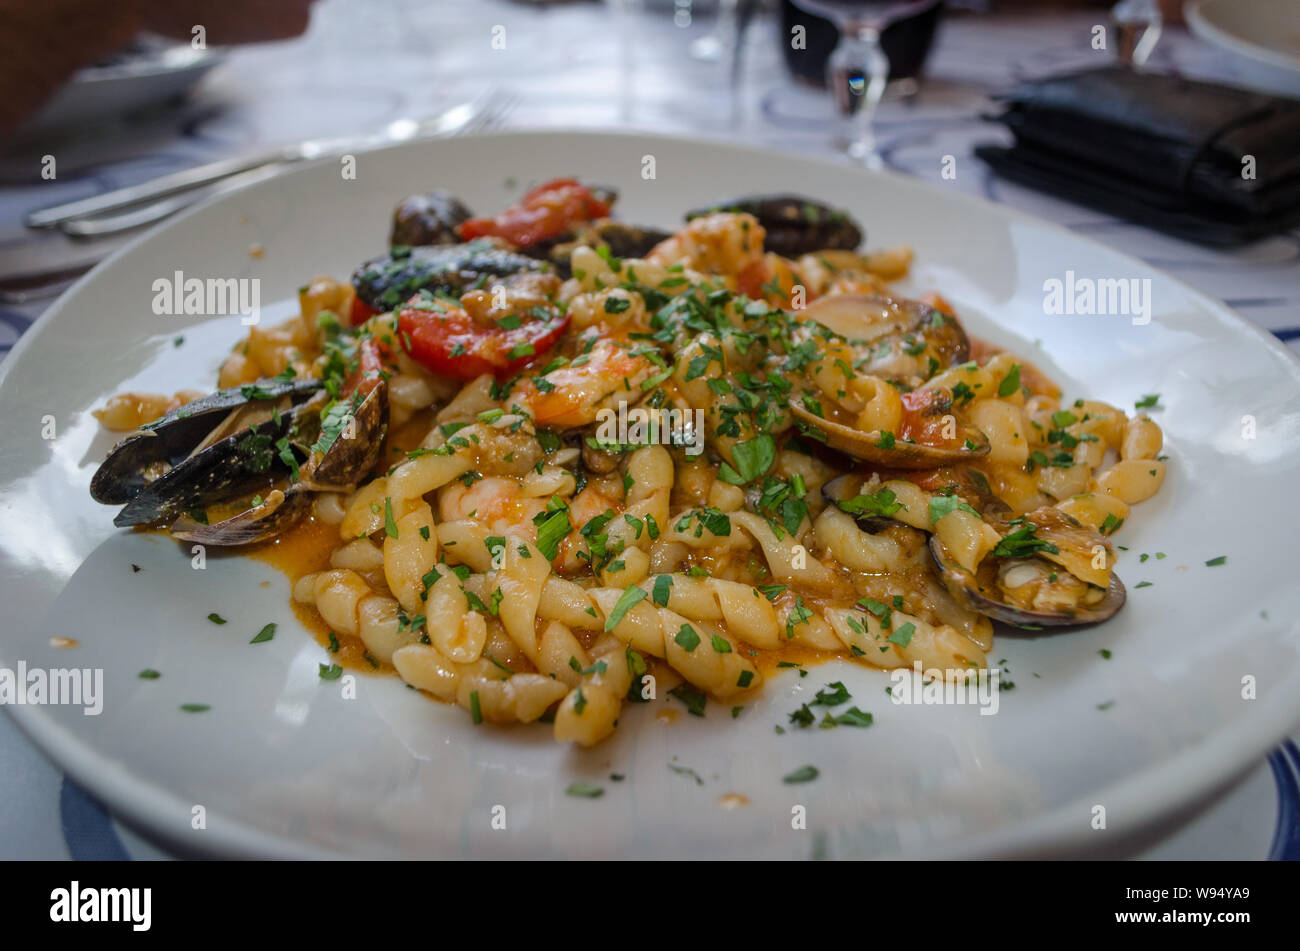 Italian cuisine - pasta with seafood: shrimps, mussels, sward fish with green parsley Stock Photo